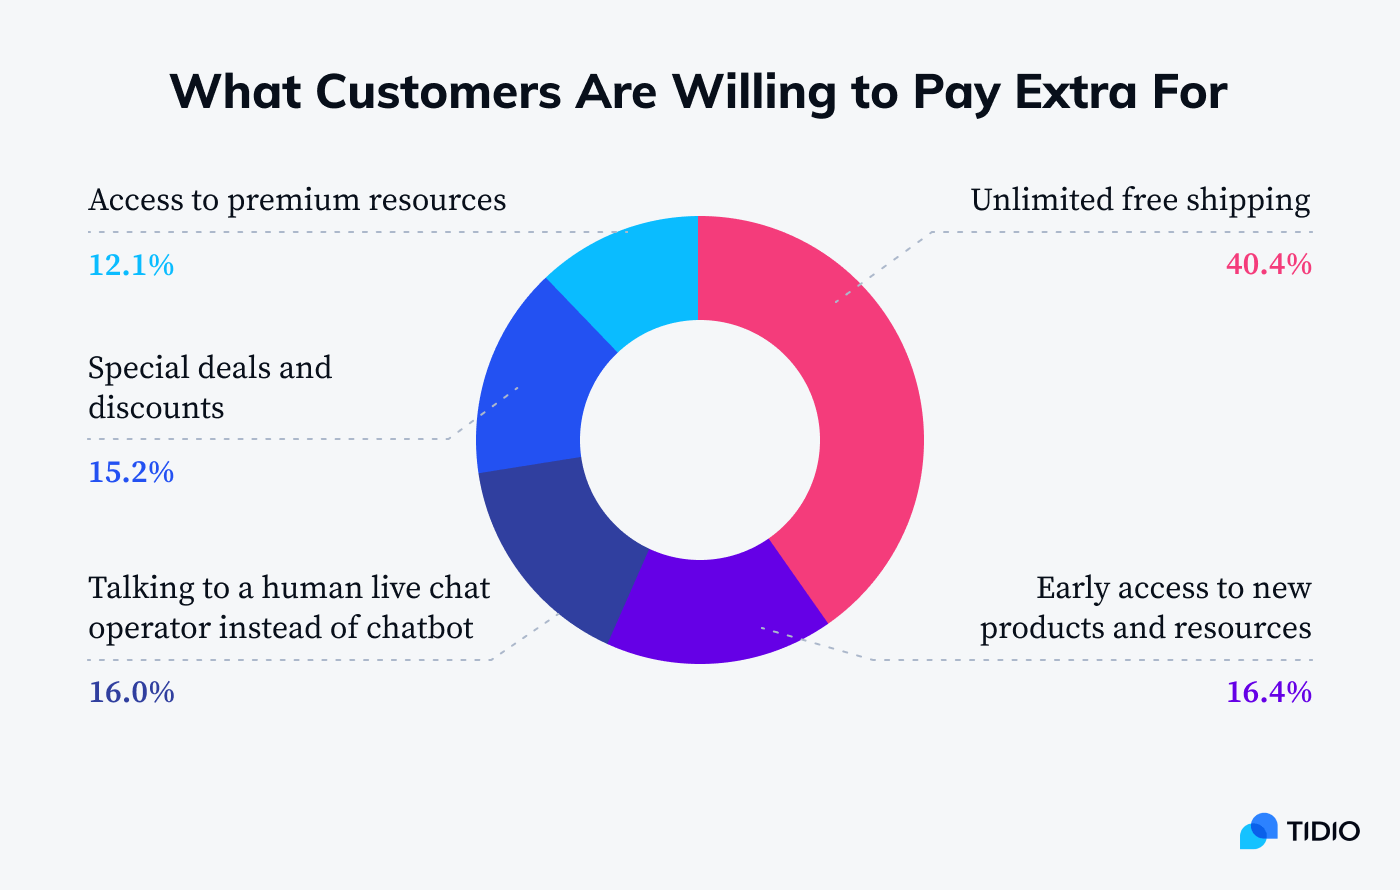 What customers are willing to pay extra for